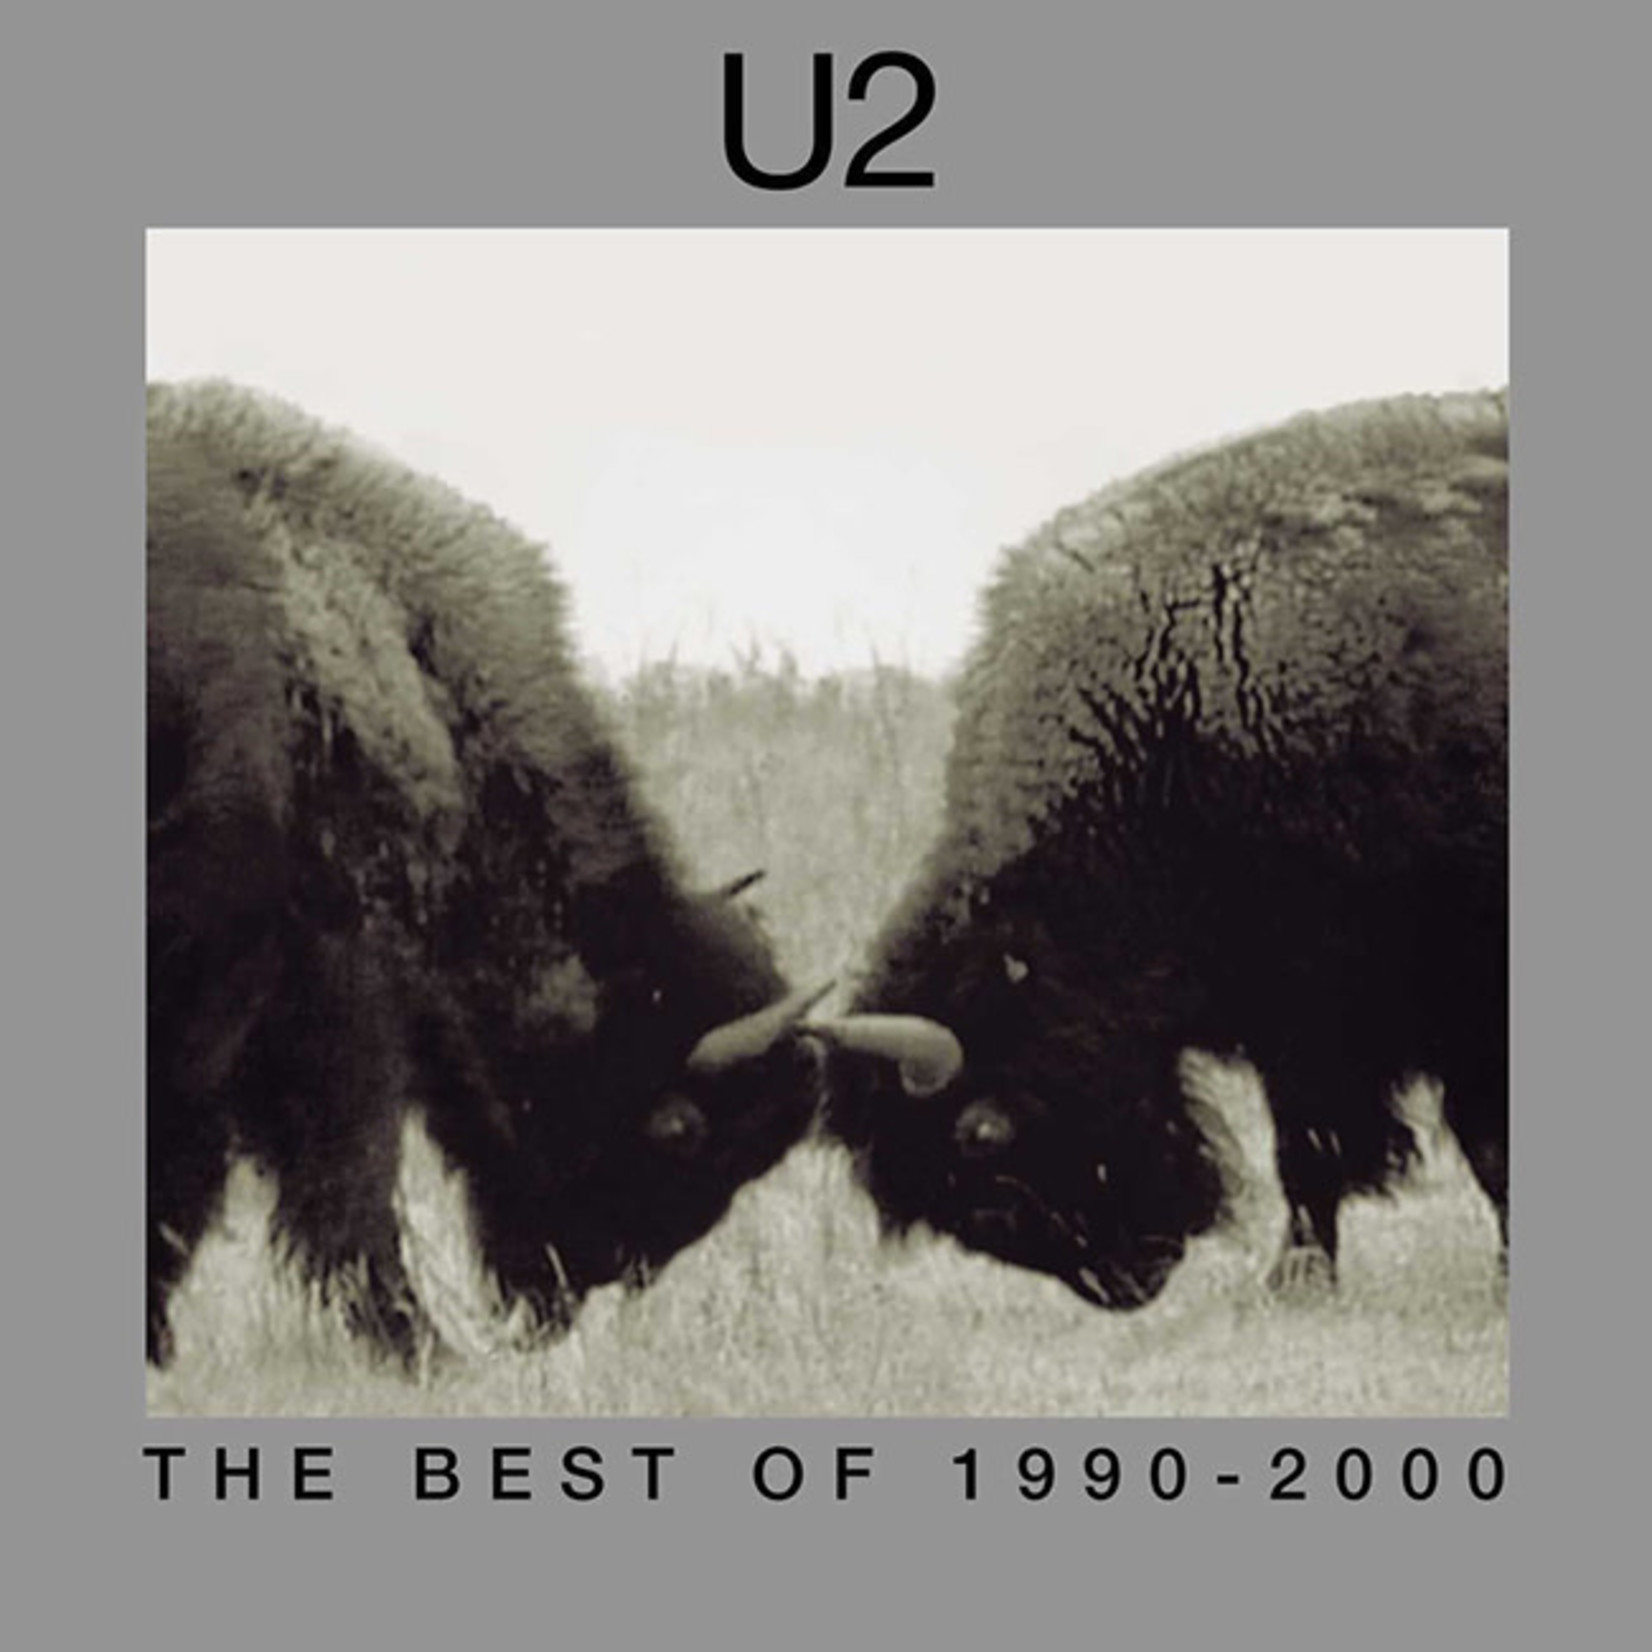 [New] U2 - The Best of 1990-2000 (2LP)